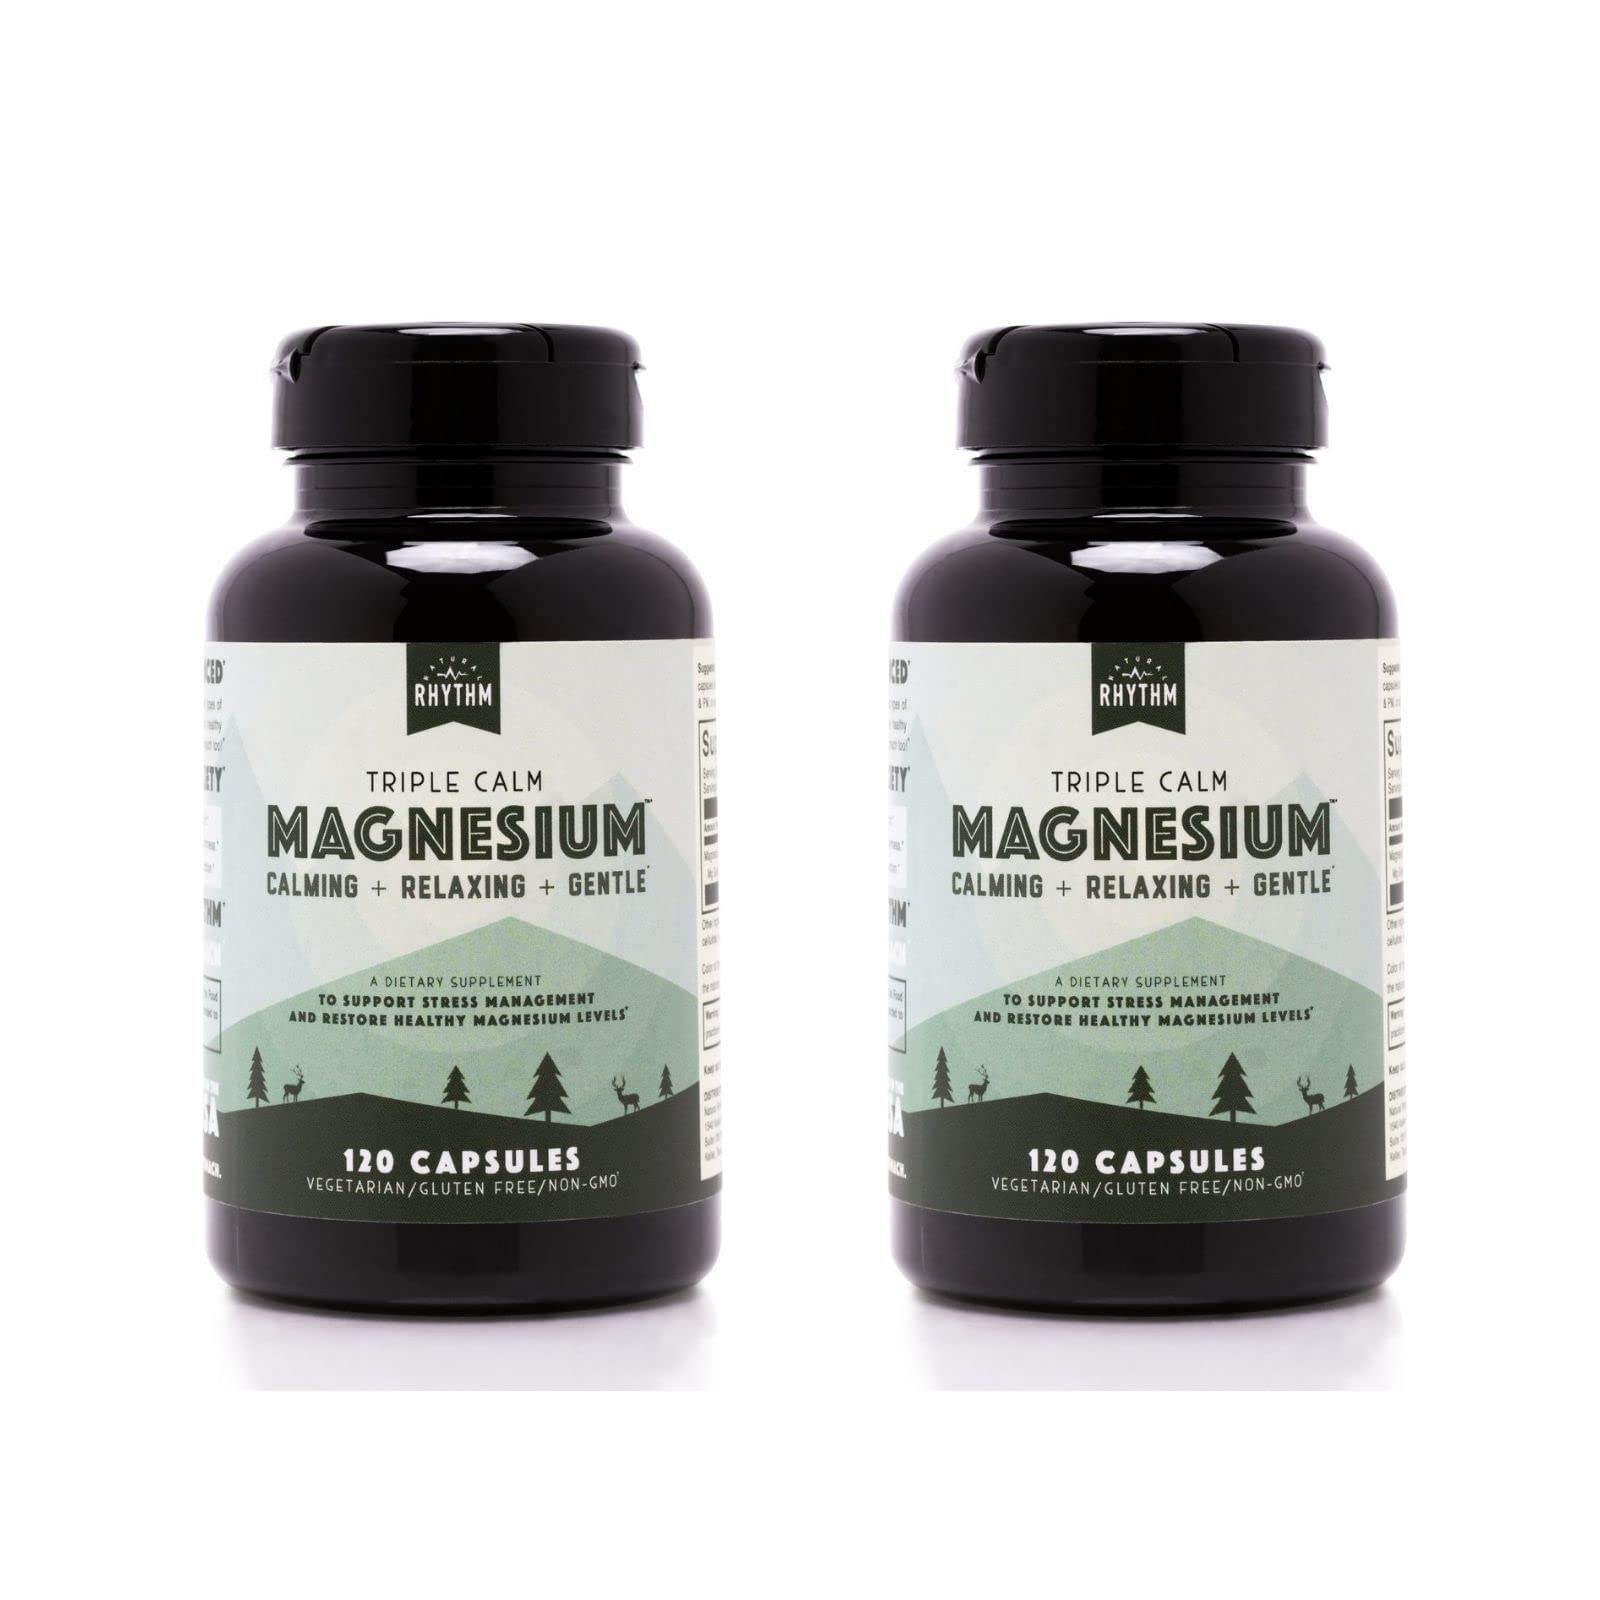 Natural Rhythm Triple Calm Magnesium 150 mg - 2 Pack – Magnesium Supplement with Magnesium Glycinate, Malate, and Taurate. Calming Blend for Promoting Rest and Relaxation - 120 Count Bottles